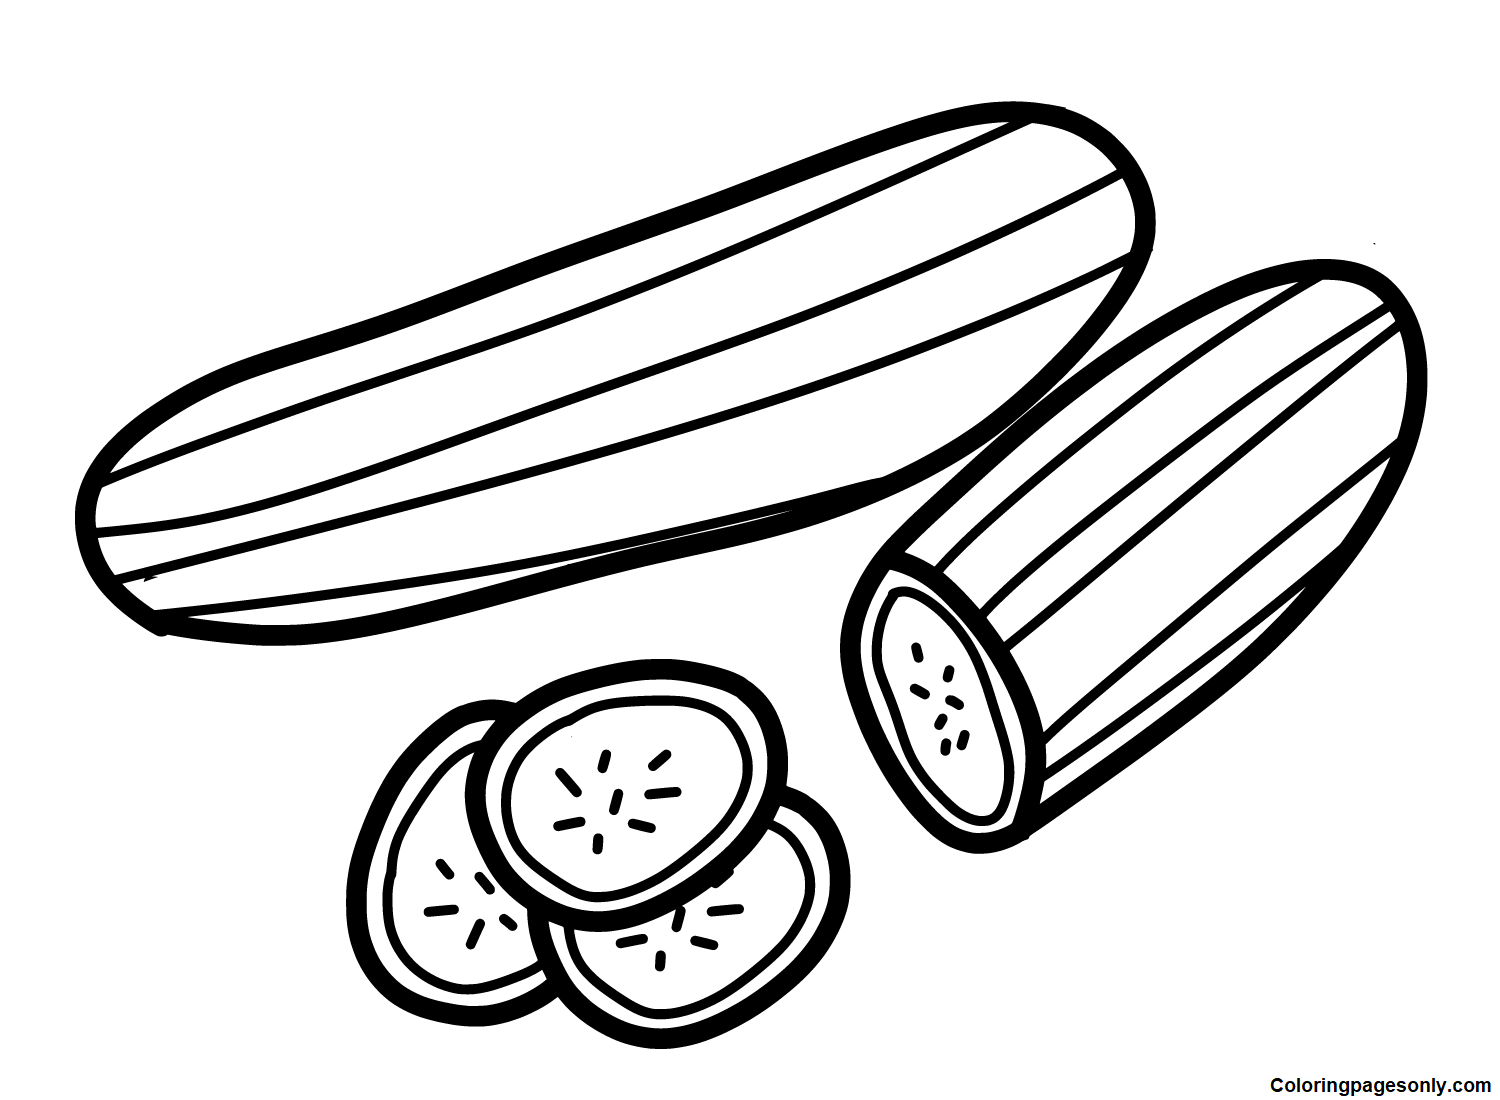 Free Printable Cucumber Coloring Page